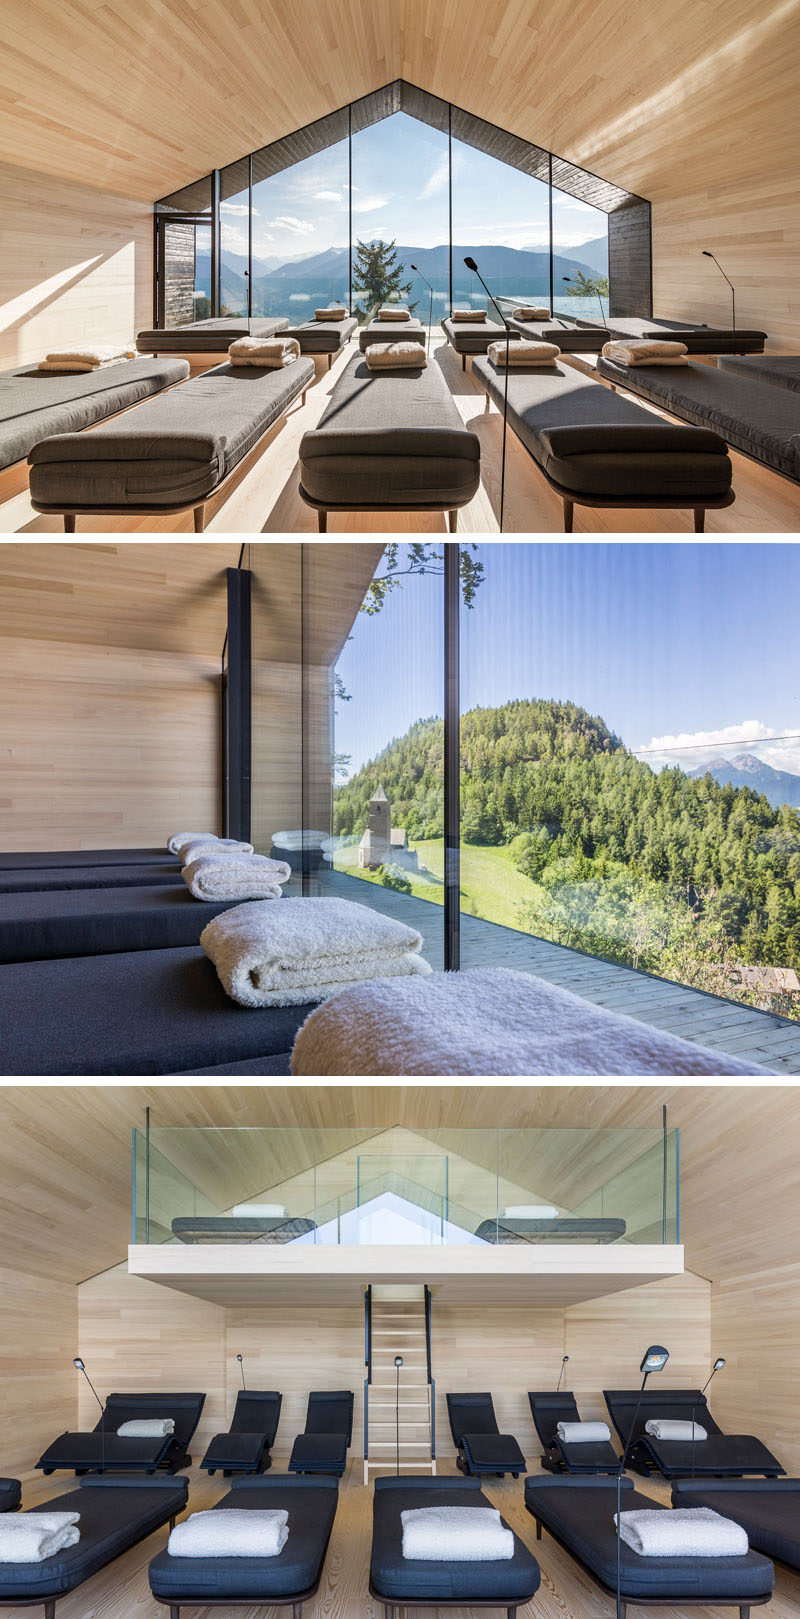 The MiraMonti Boutique Hotel in South Tyrol, Italy.